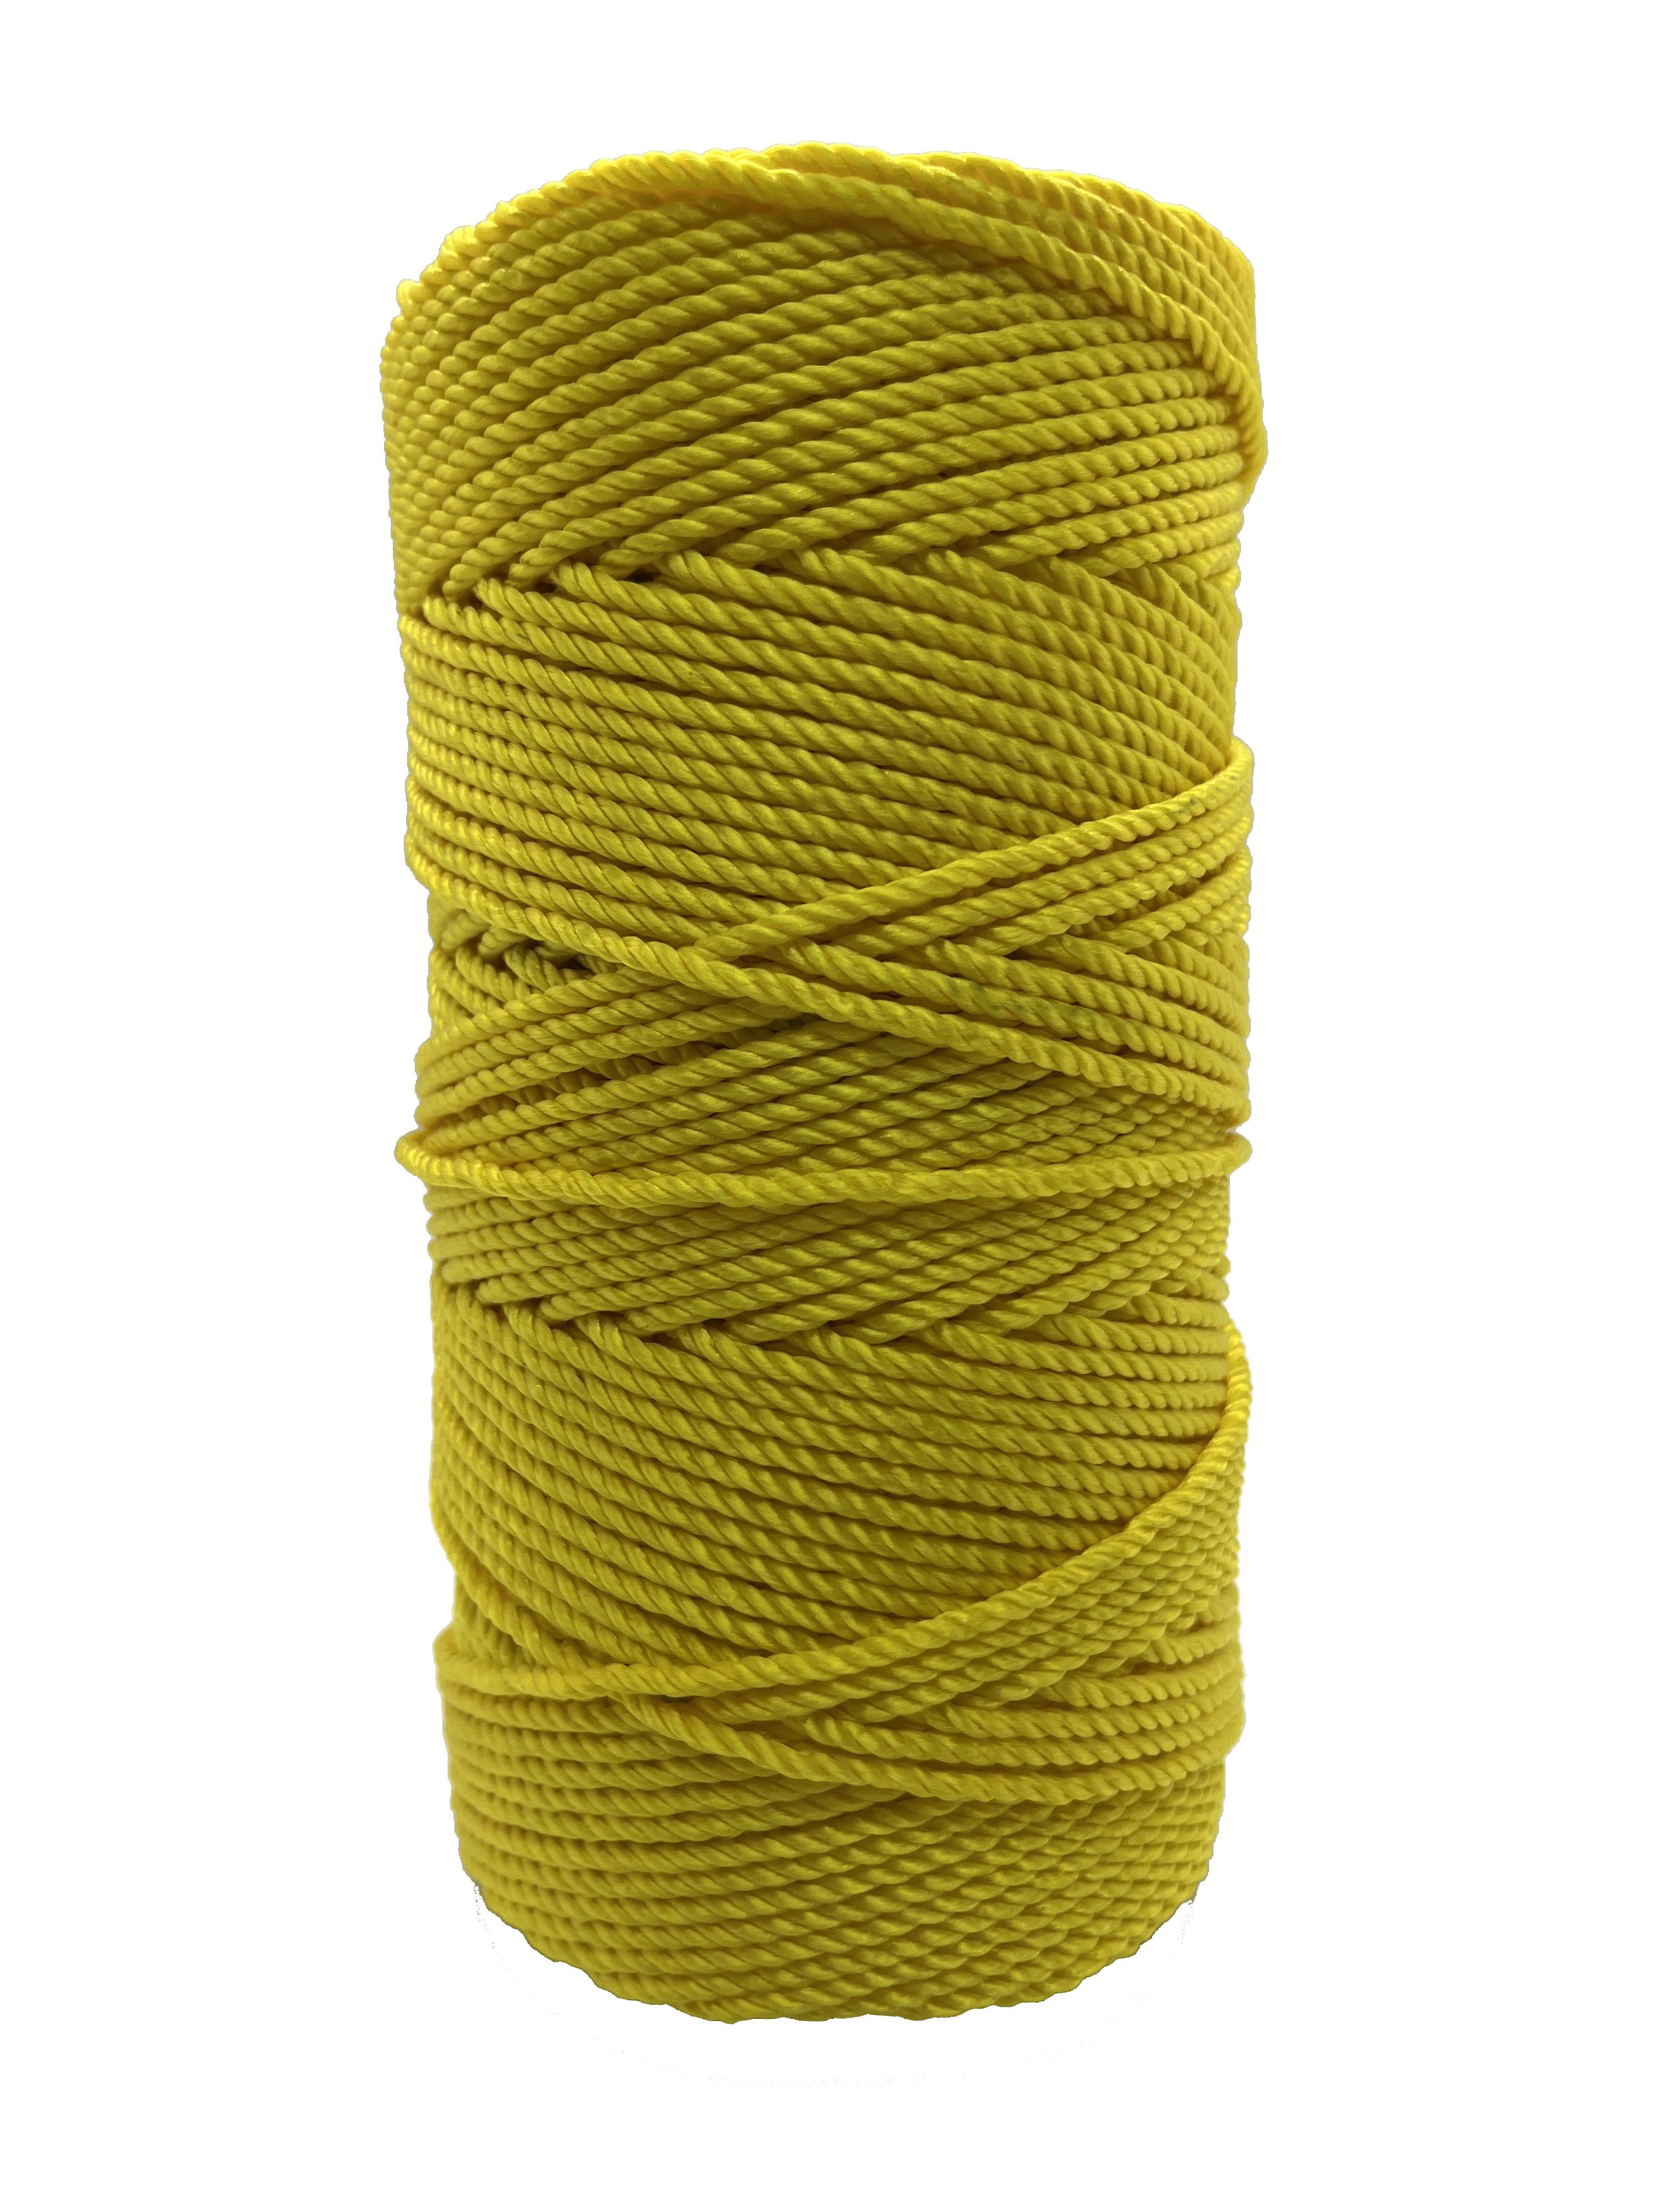 Yellow - Twine by Design